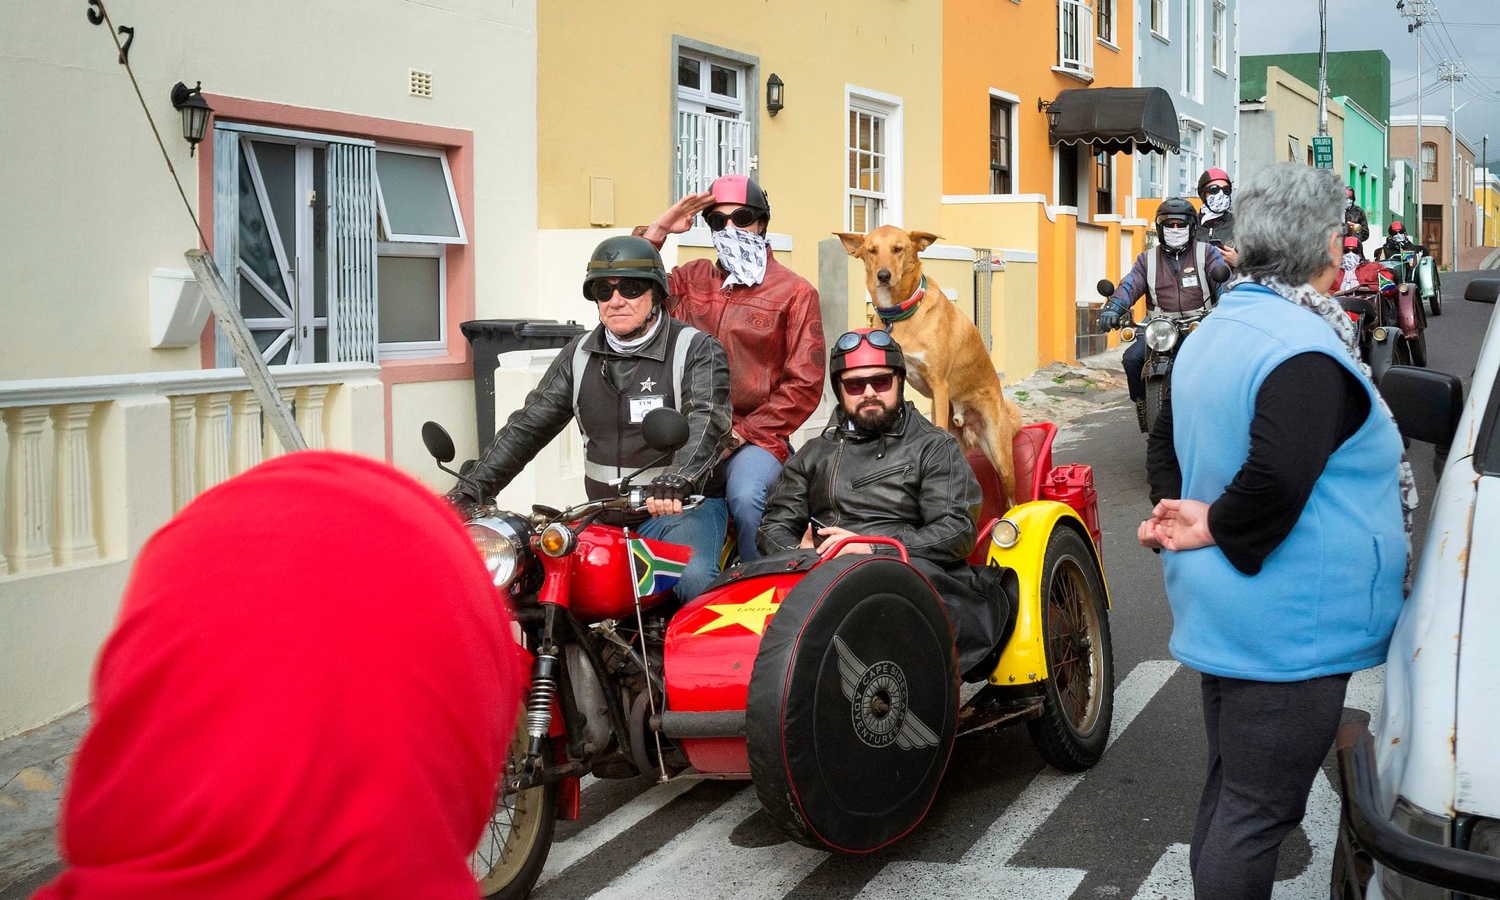   Tourists ride through Bo-Kaap on motorcycles. The district is a big draw for visitors. Photograph: Rodger Bosch/AFP/Getty Images